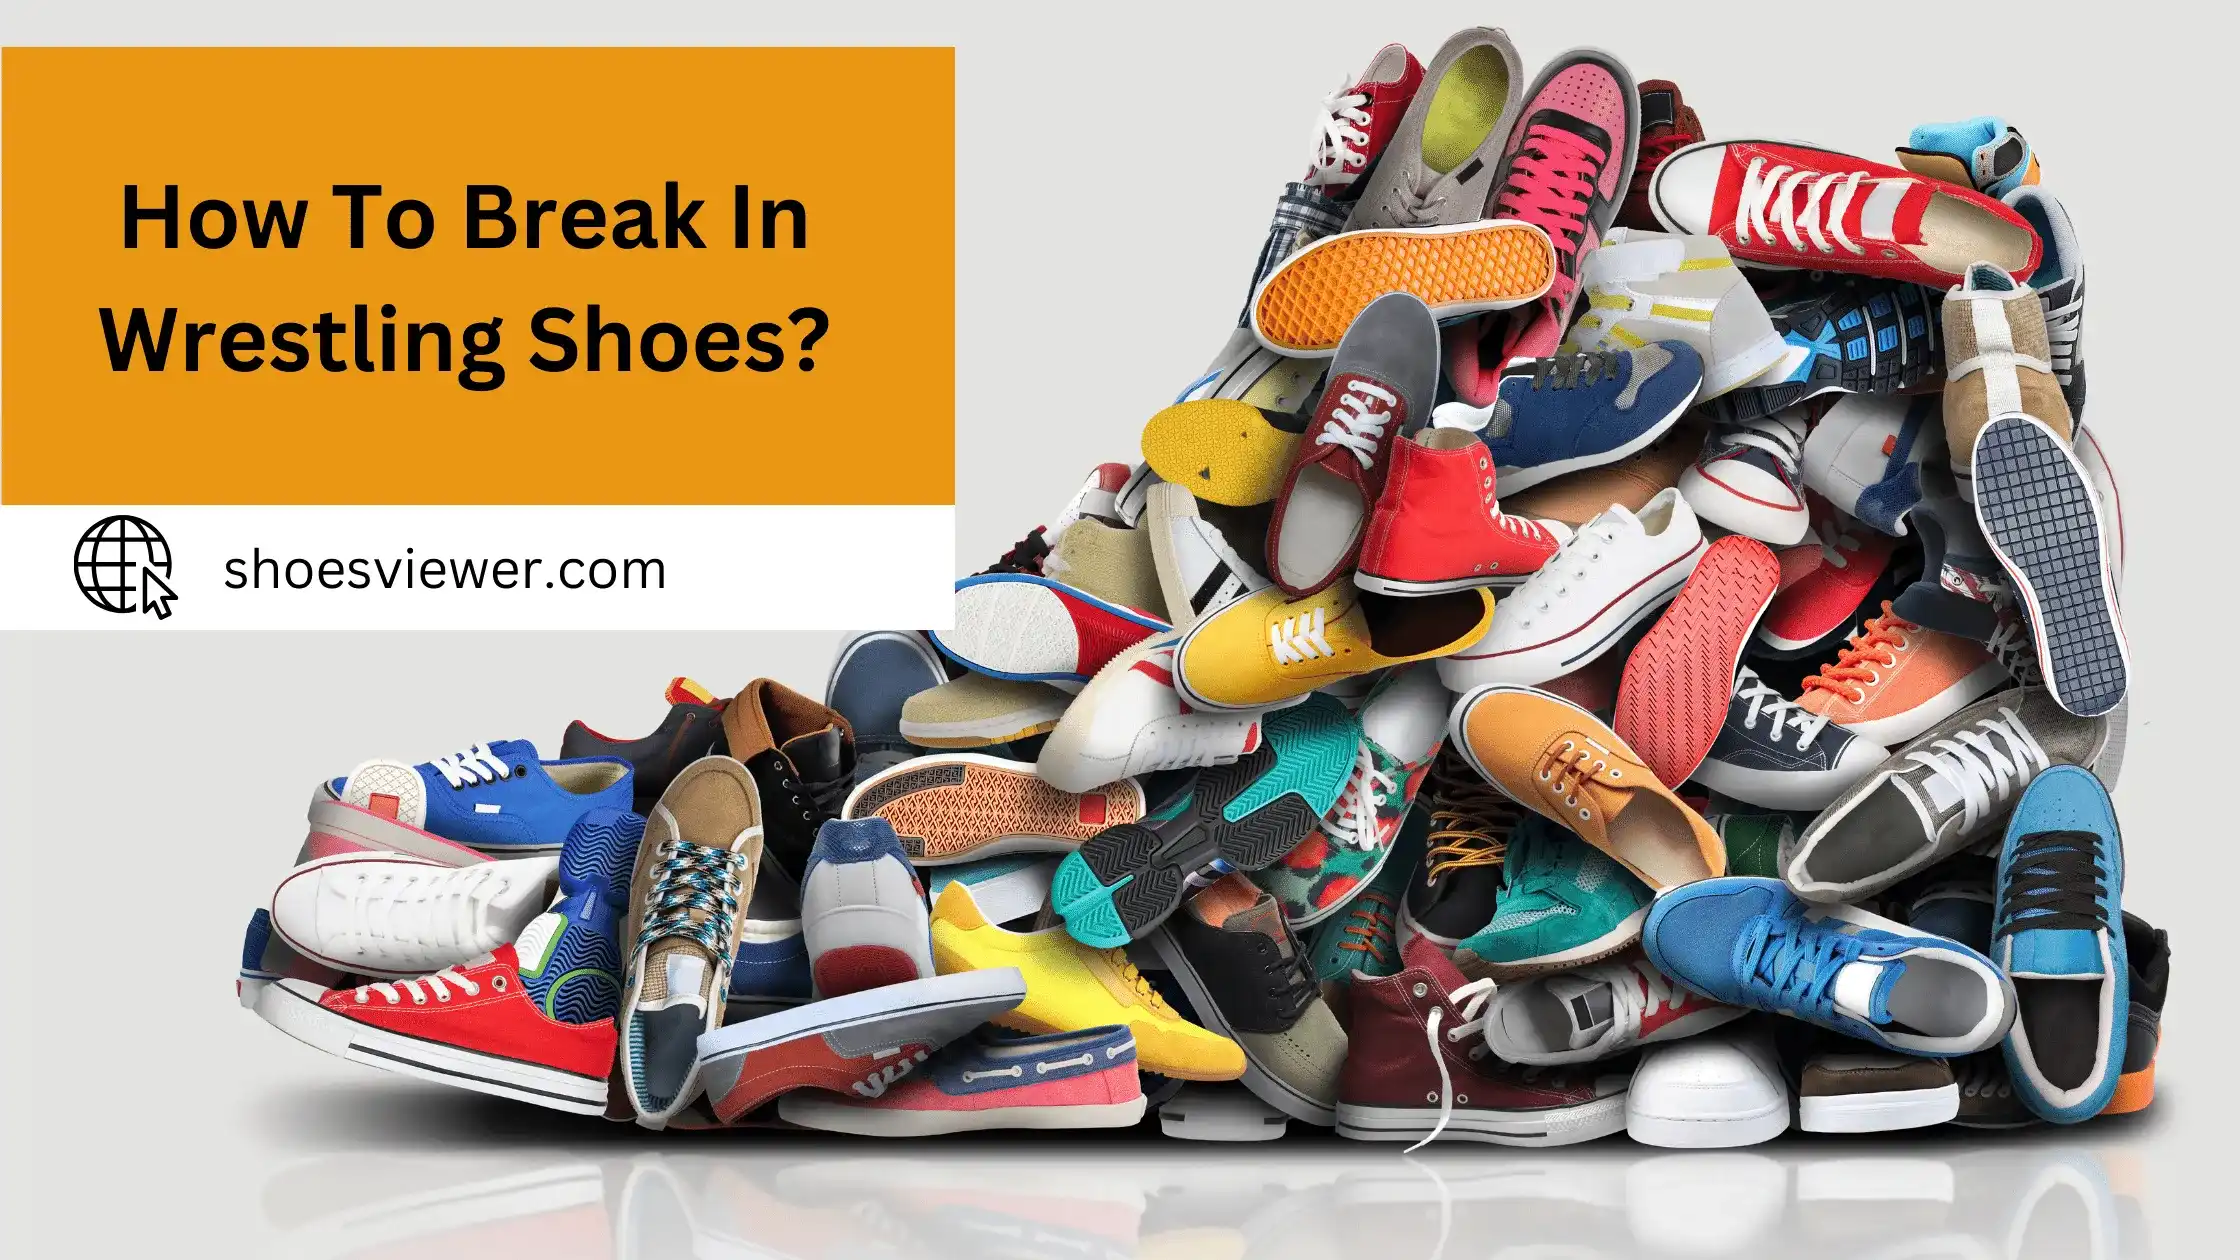 How To Break In Wrestling Shoes? All You Need To Know